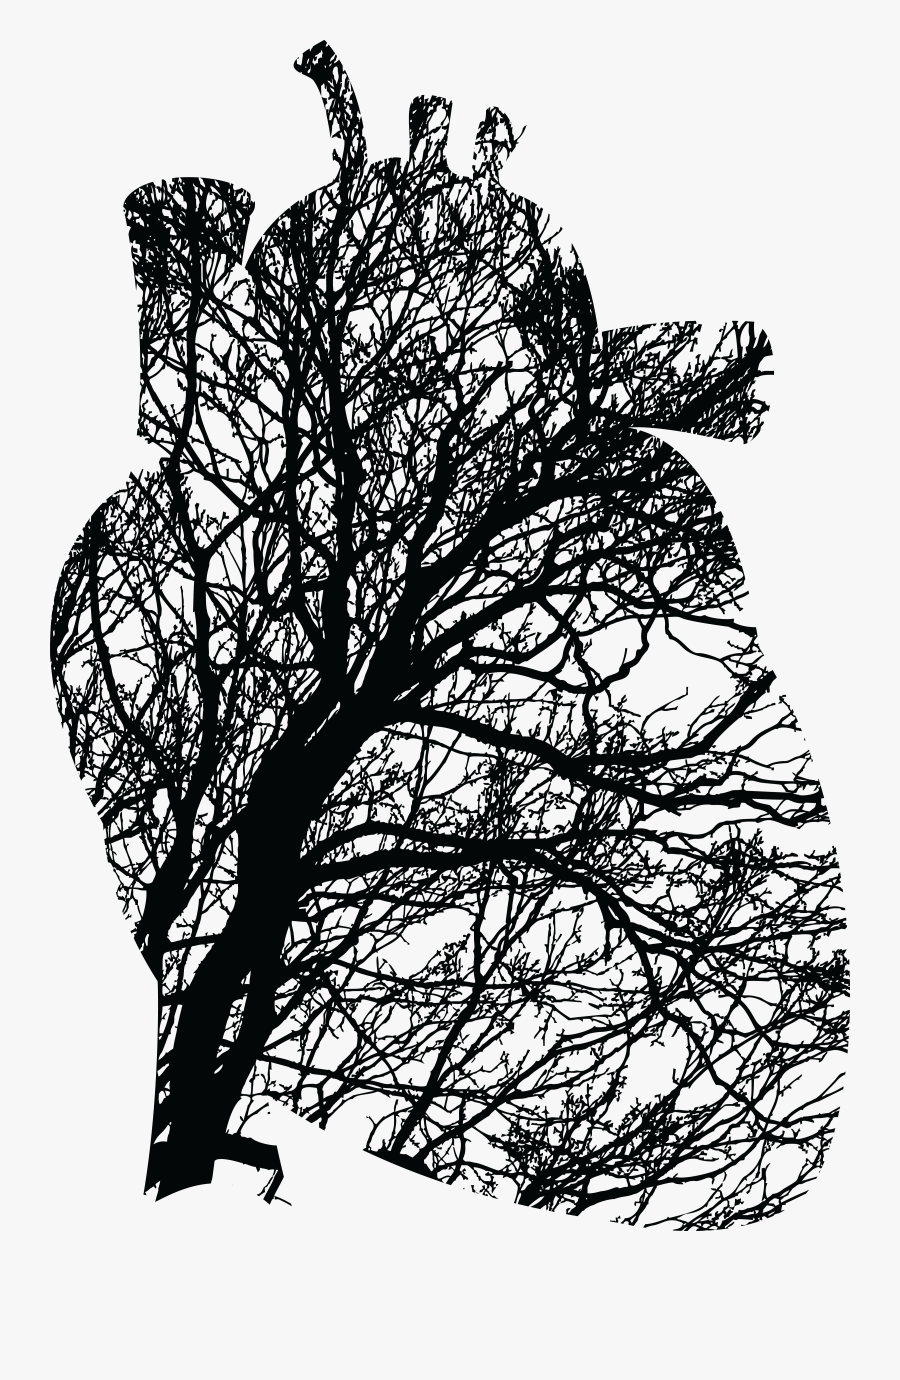 Anatomy Of The Heart Clipart - Black And White Heart Tree, Transparent Clipart